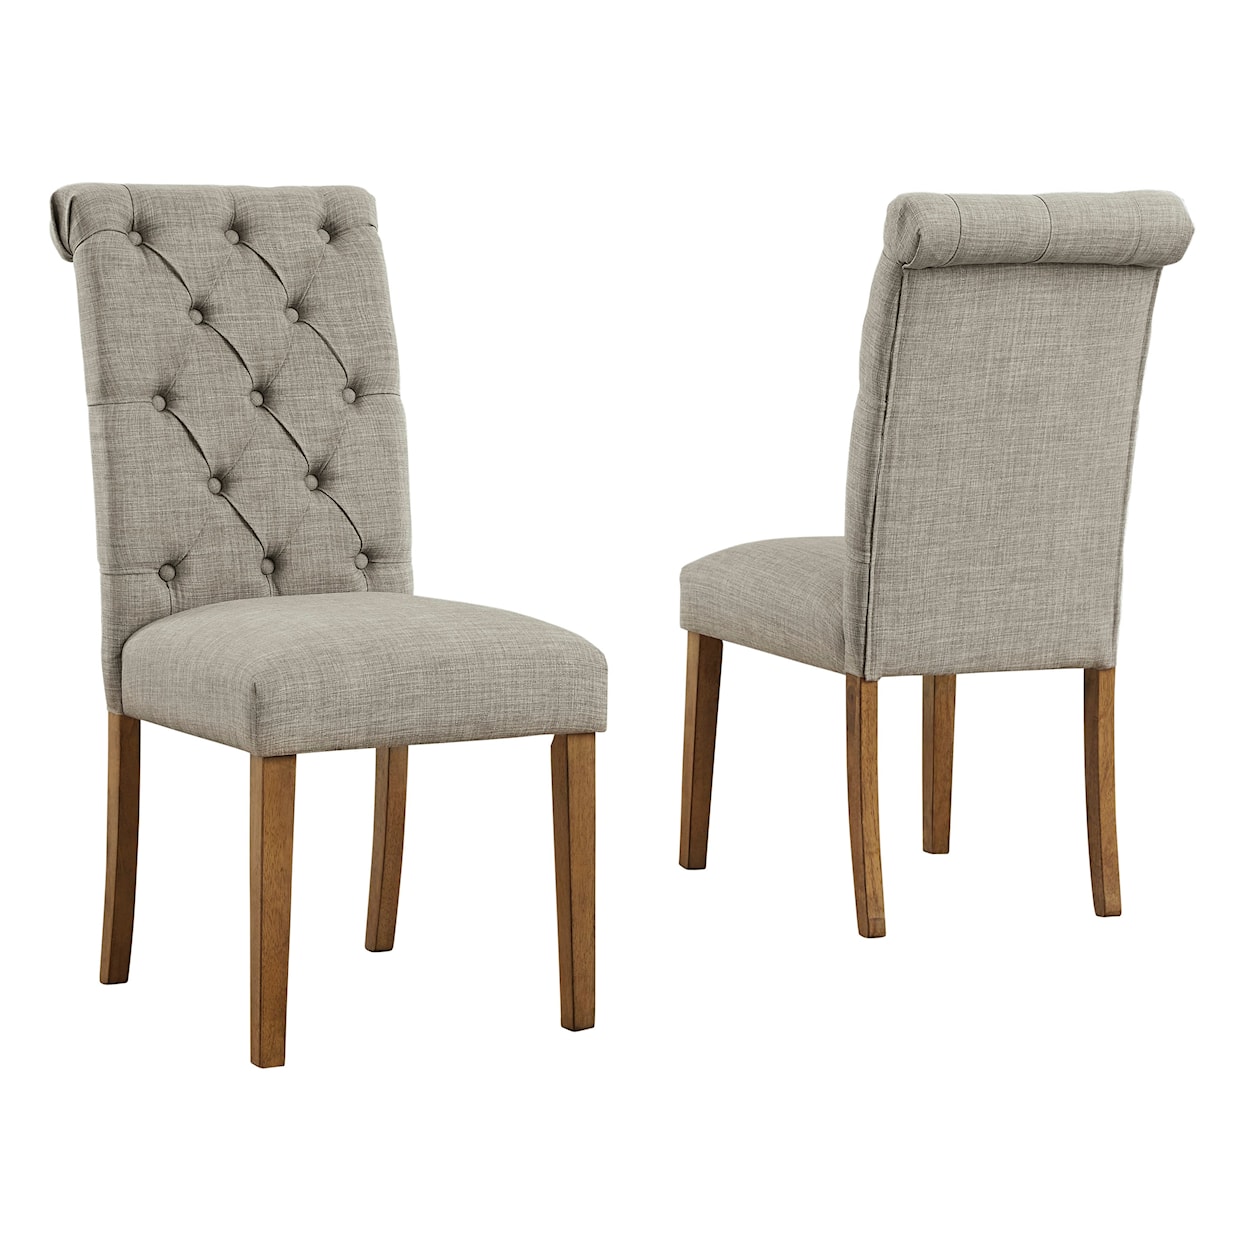 Signature Design by Ashley Furniture Harvina Dining Chair